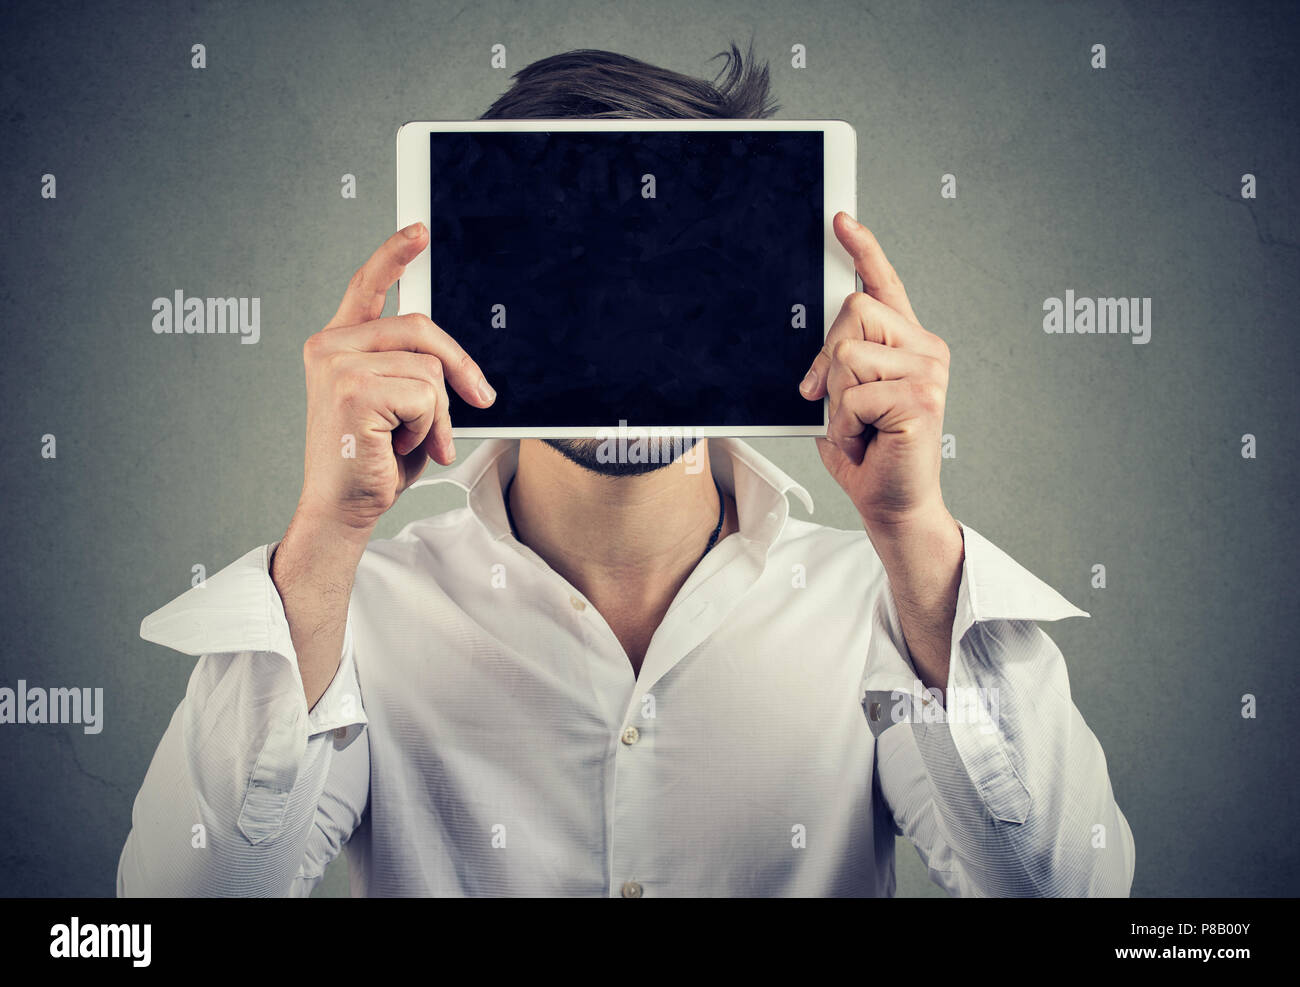 Anonymous man in white shirt holding tablet in front of face being